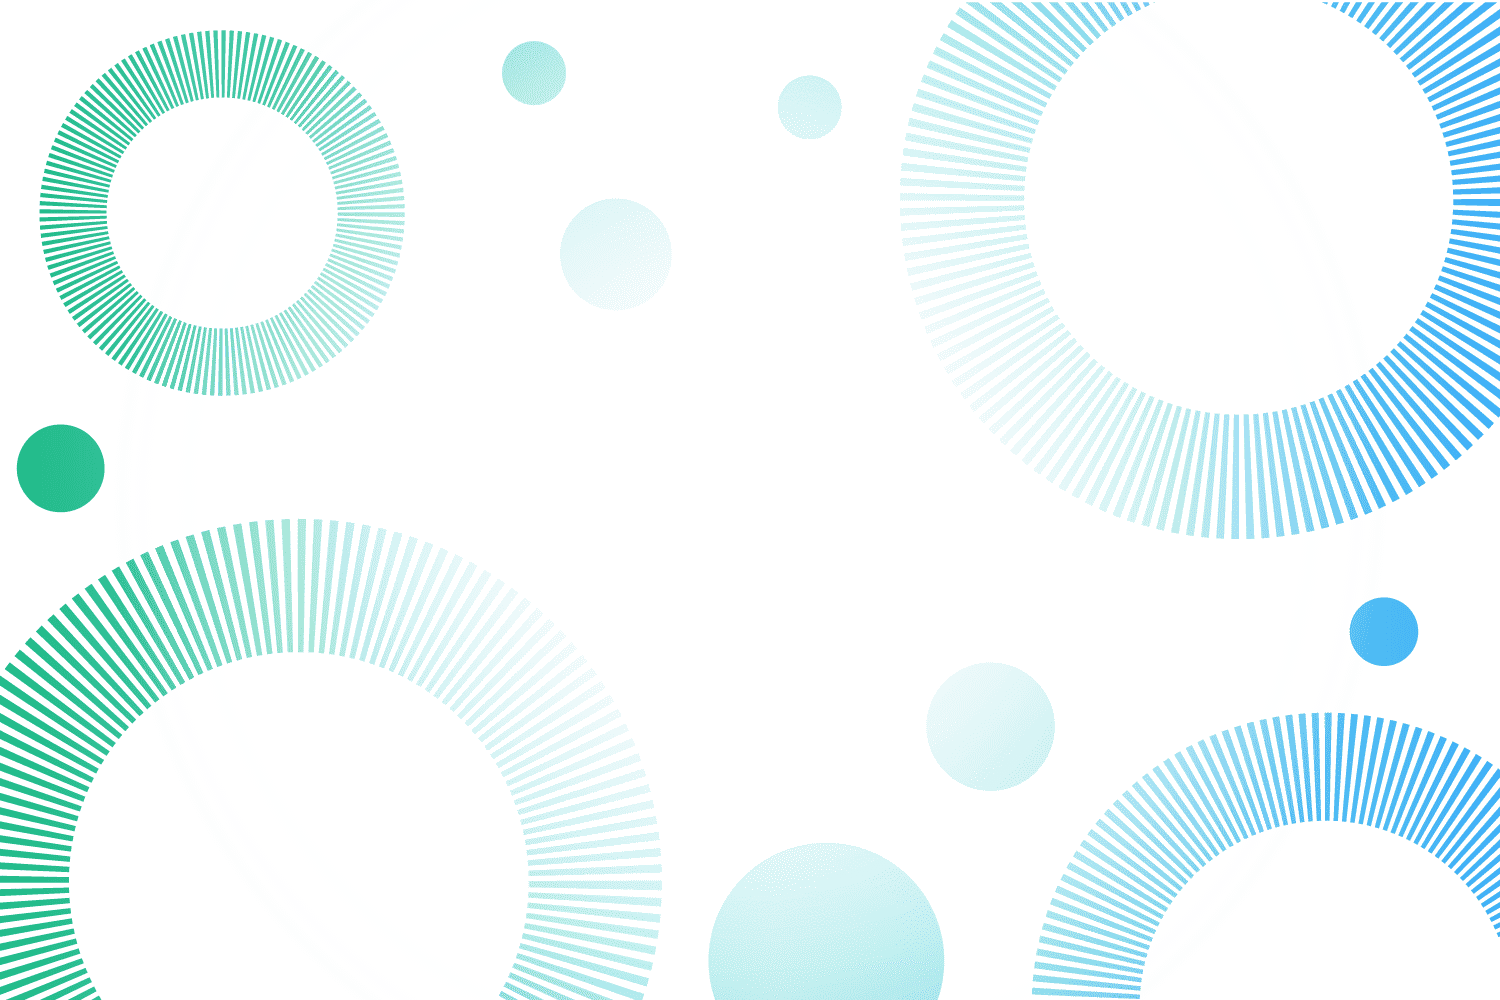 Blue and green notched circles with white radial gradient